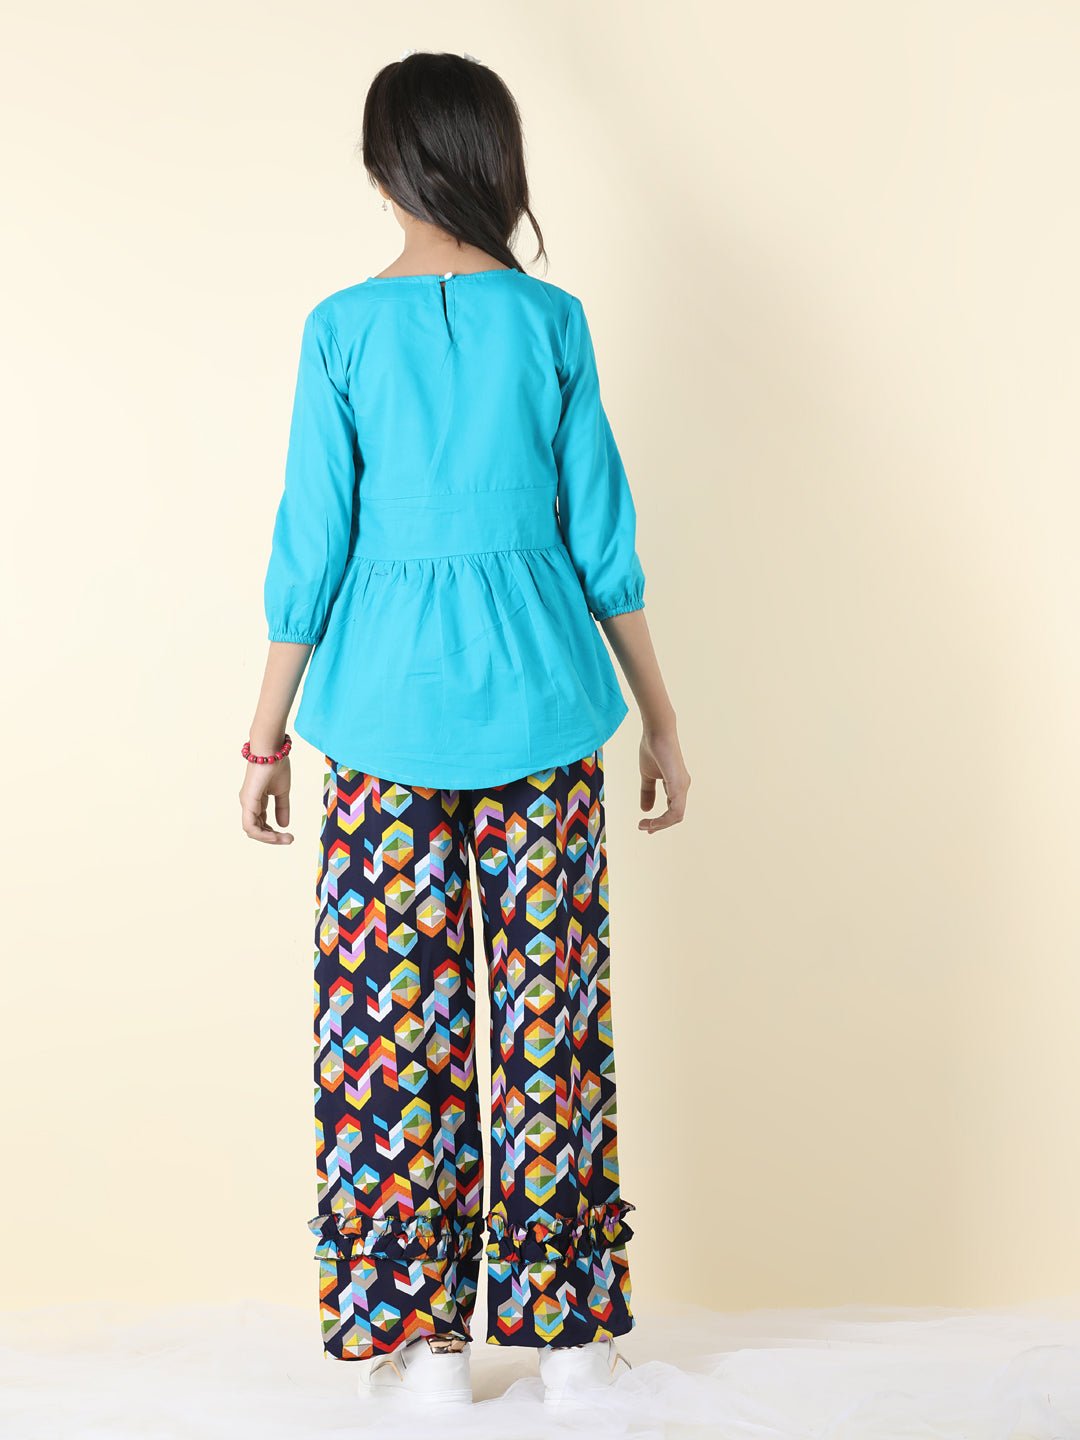 Cutiekins Girls Solid Embellished Top With Printed Palazzo -Teal Blue & Multi